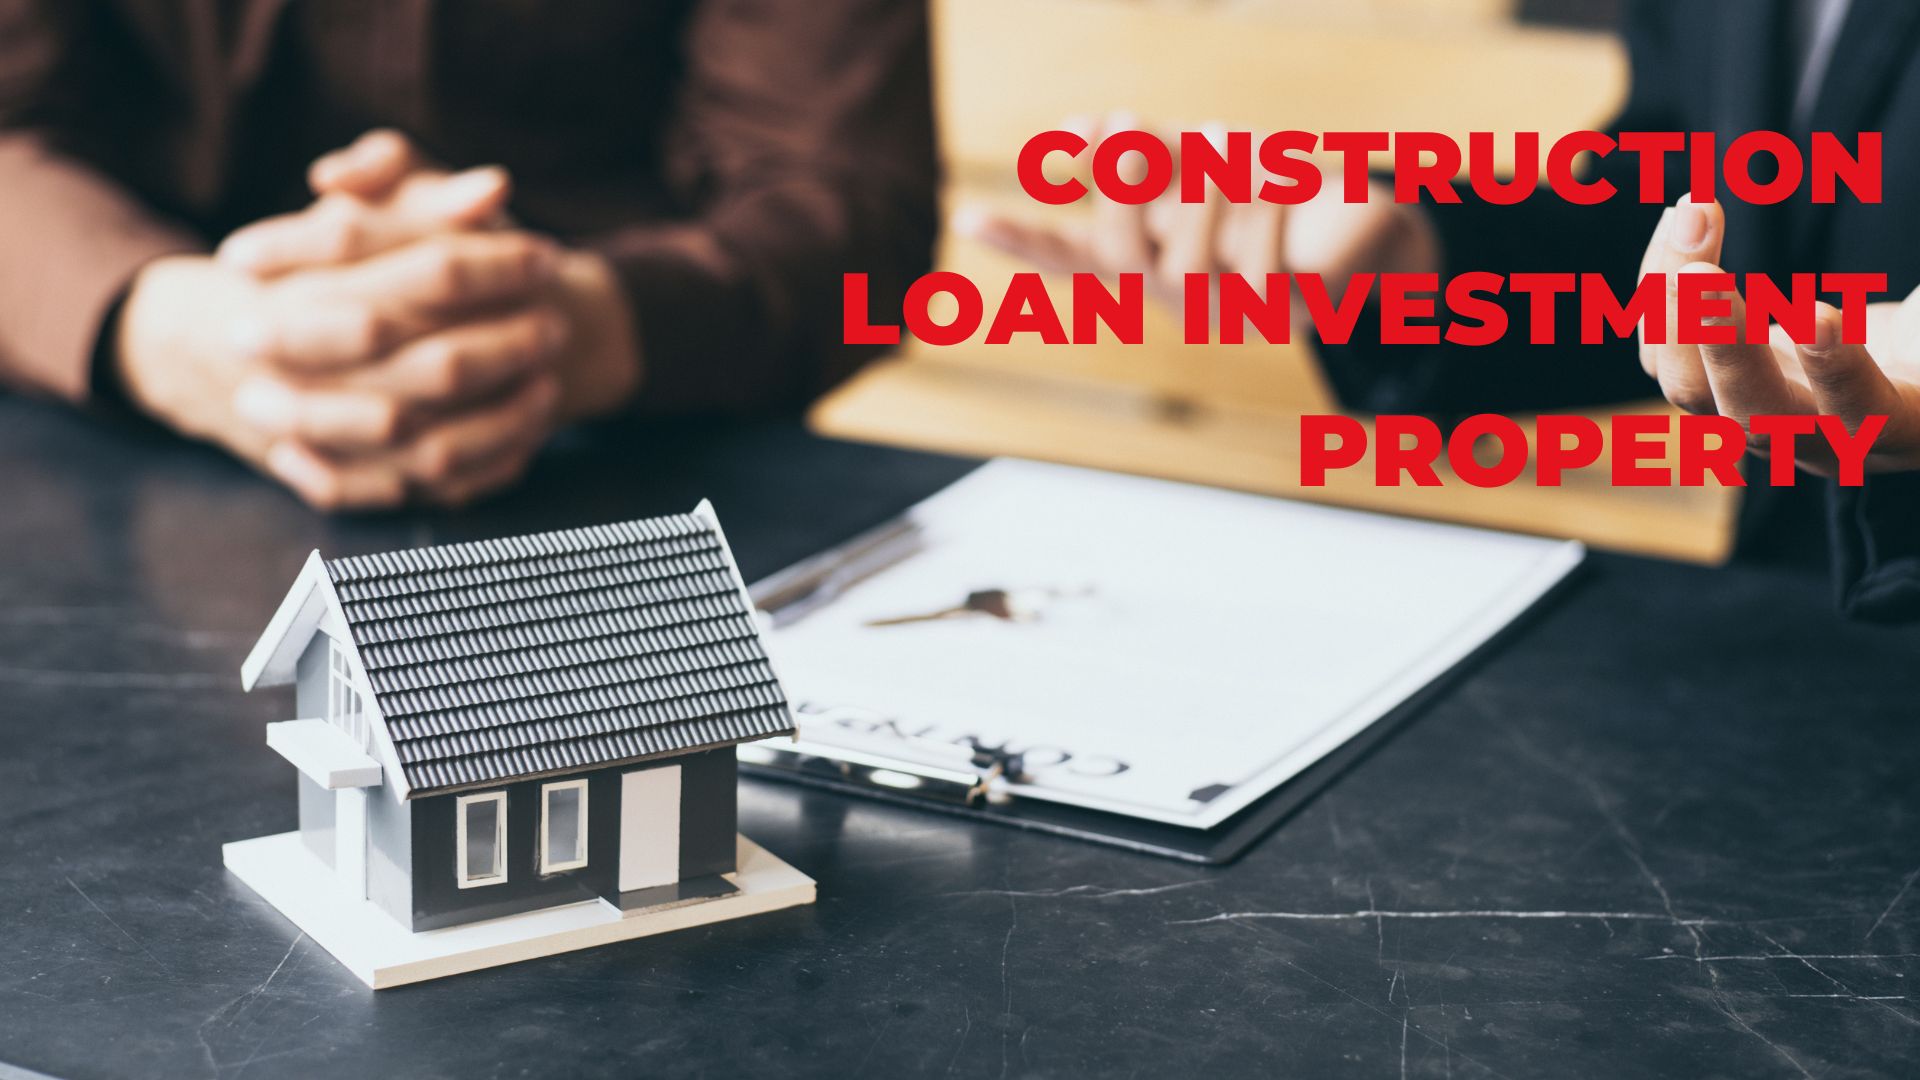 Construction Loan Investment Property